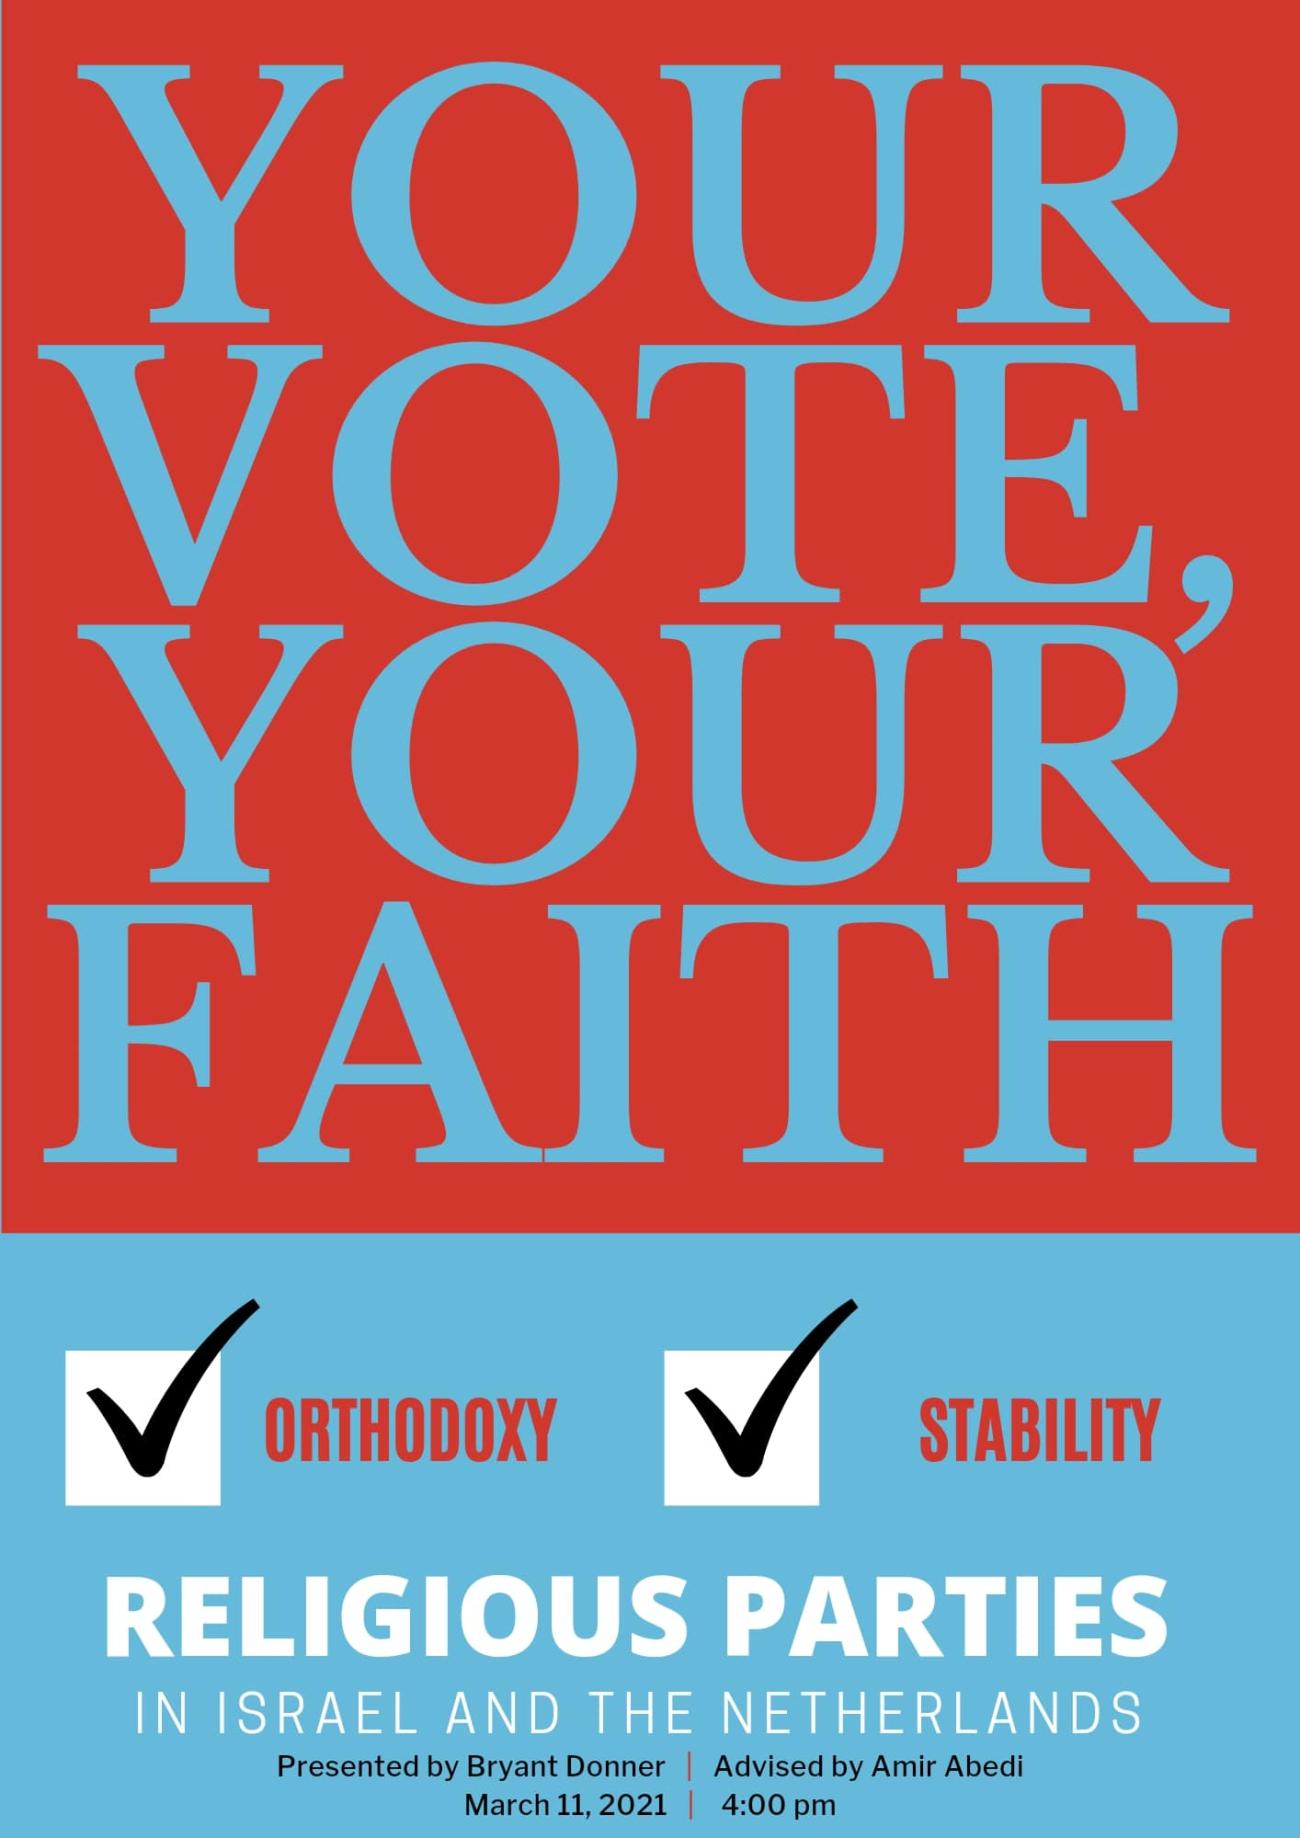 Text reads: "Your Vote, Your Faith. Religious parties in Israel and the Netherlands. Presented by Bryant Donner. Advised by Amir Abedi. March 11, 2021 4:00 pm." The background is red under the title and blue everywhere else. Between the text and subheading are two checkboxes labeled "Orthodoxy" and "Stability", each containing a large black checkmark. 